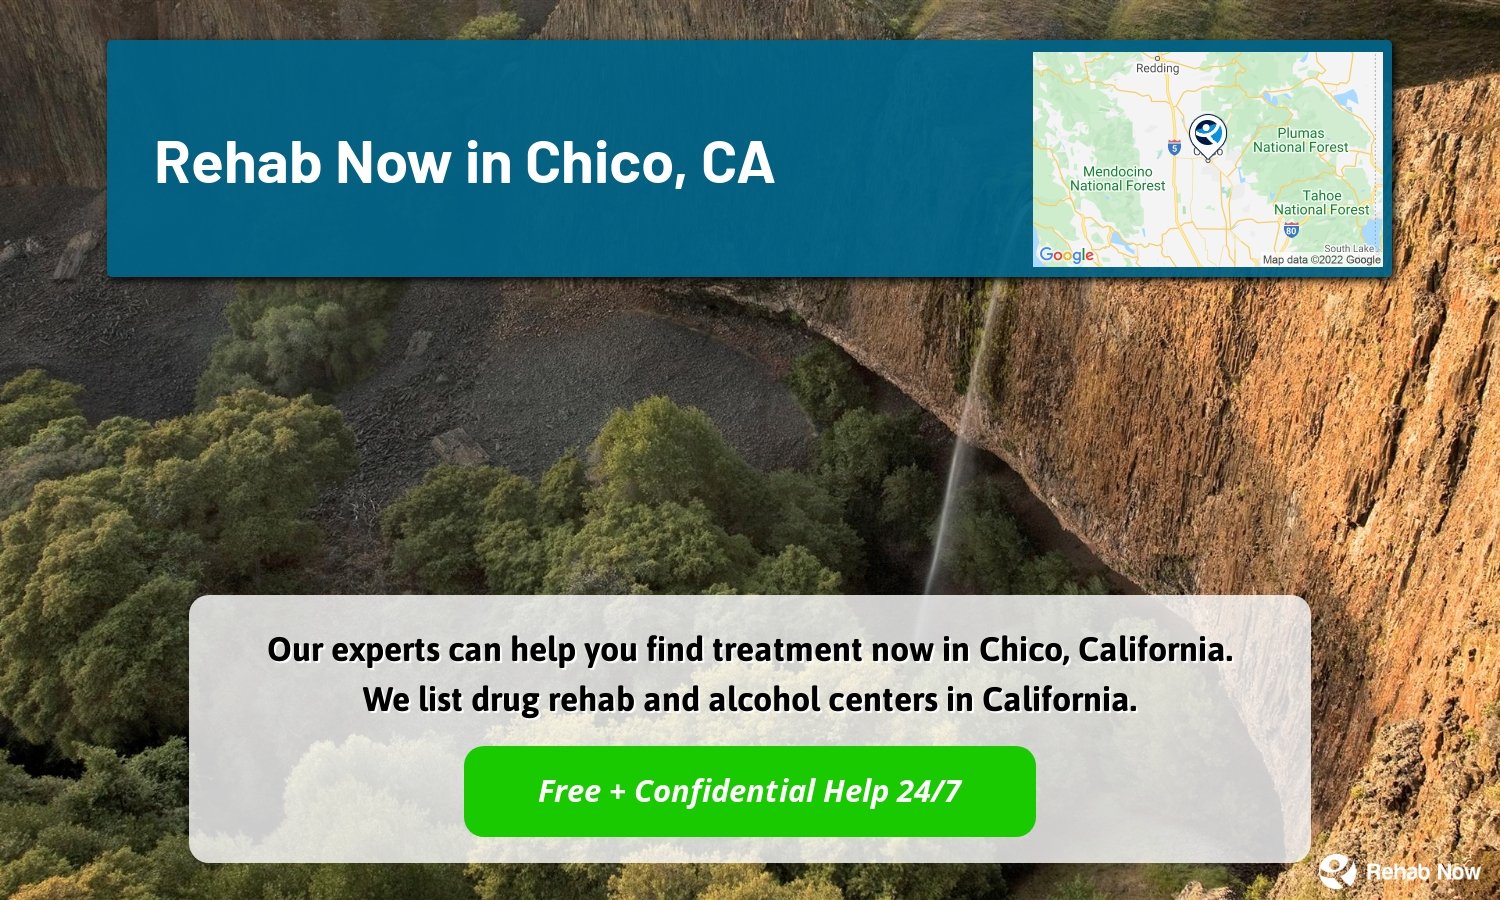 Our experts can help you find treatment now in Chico, California. We list drug rehab and alcohol centers in California.